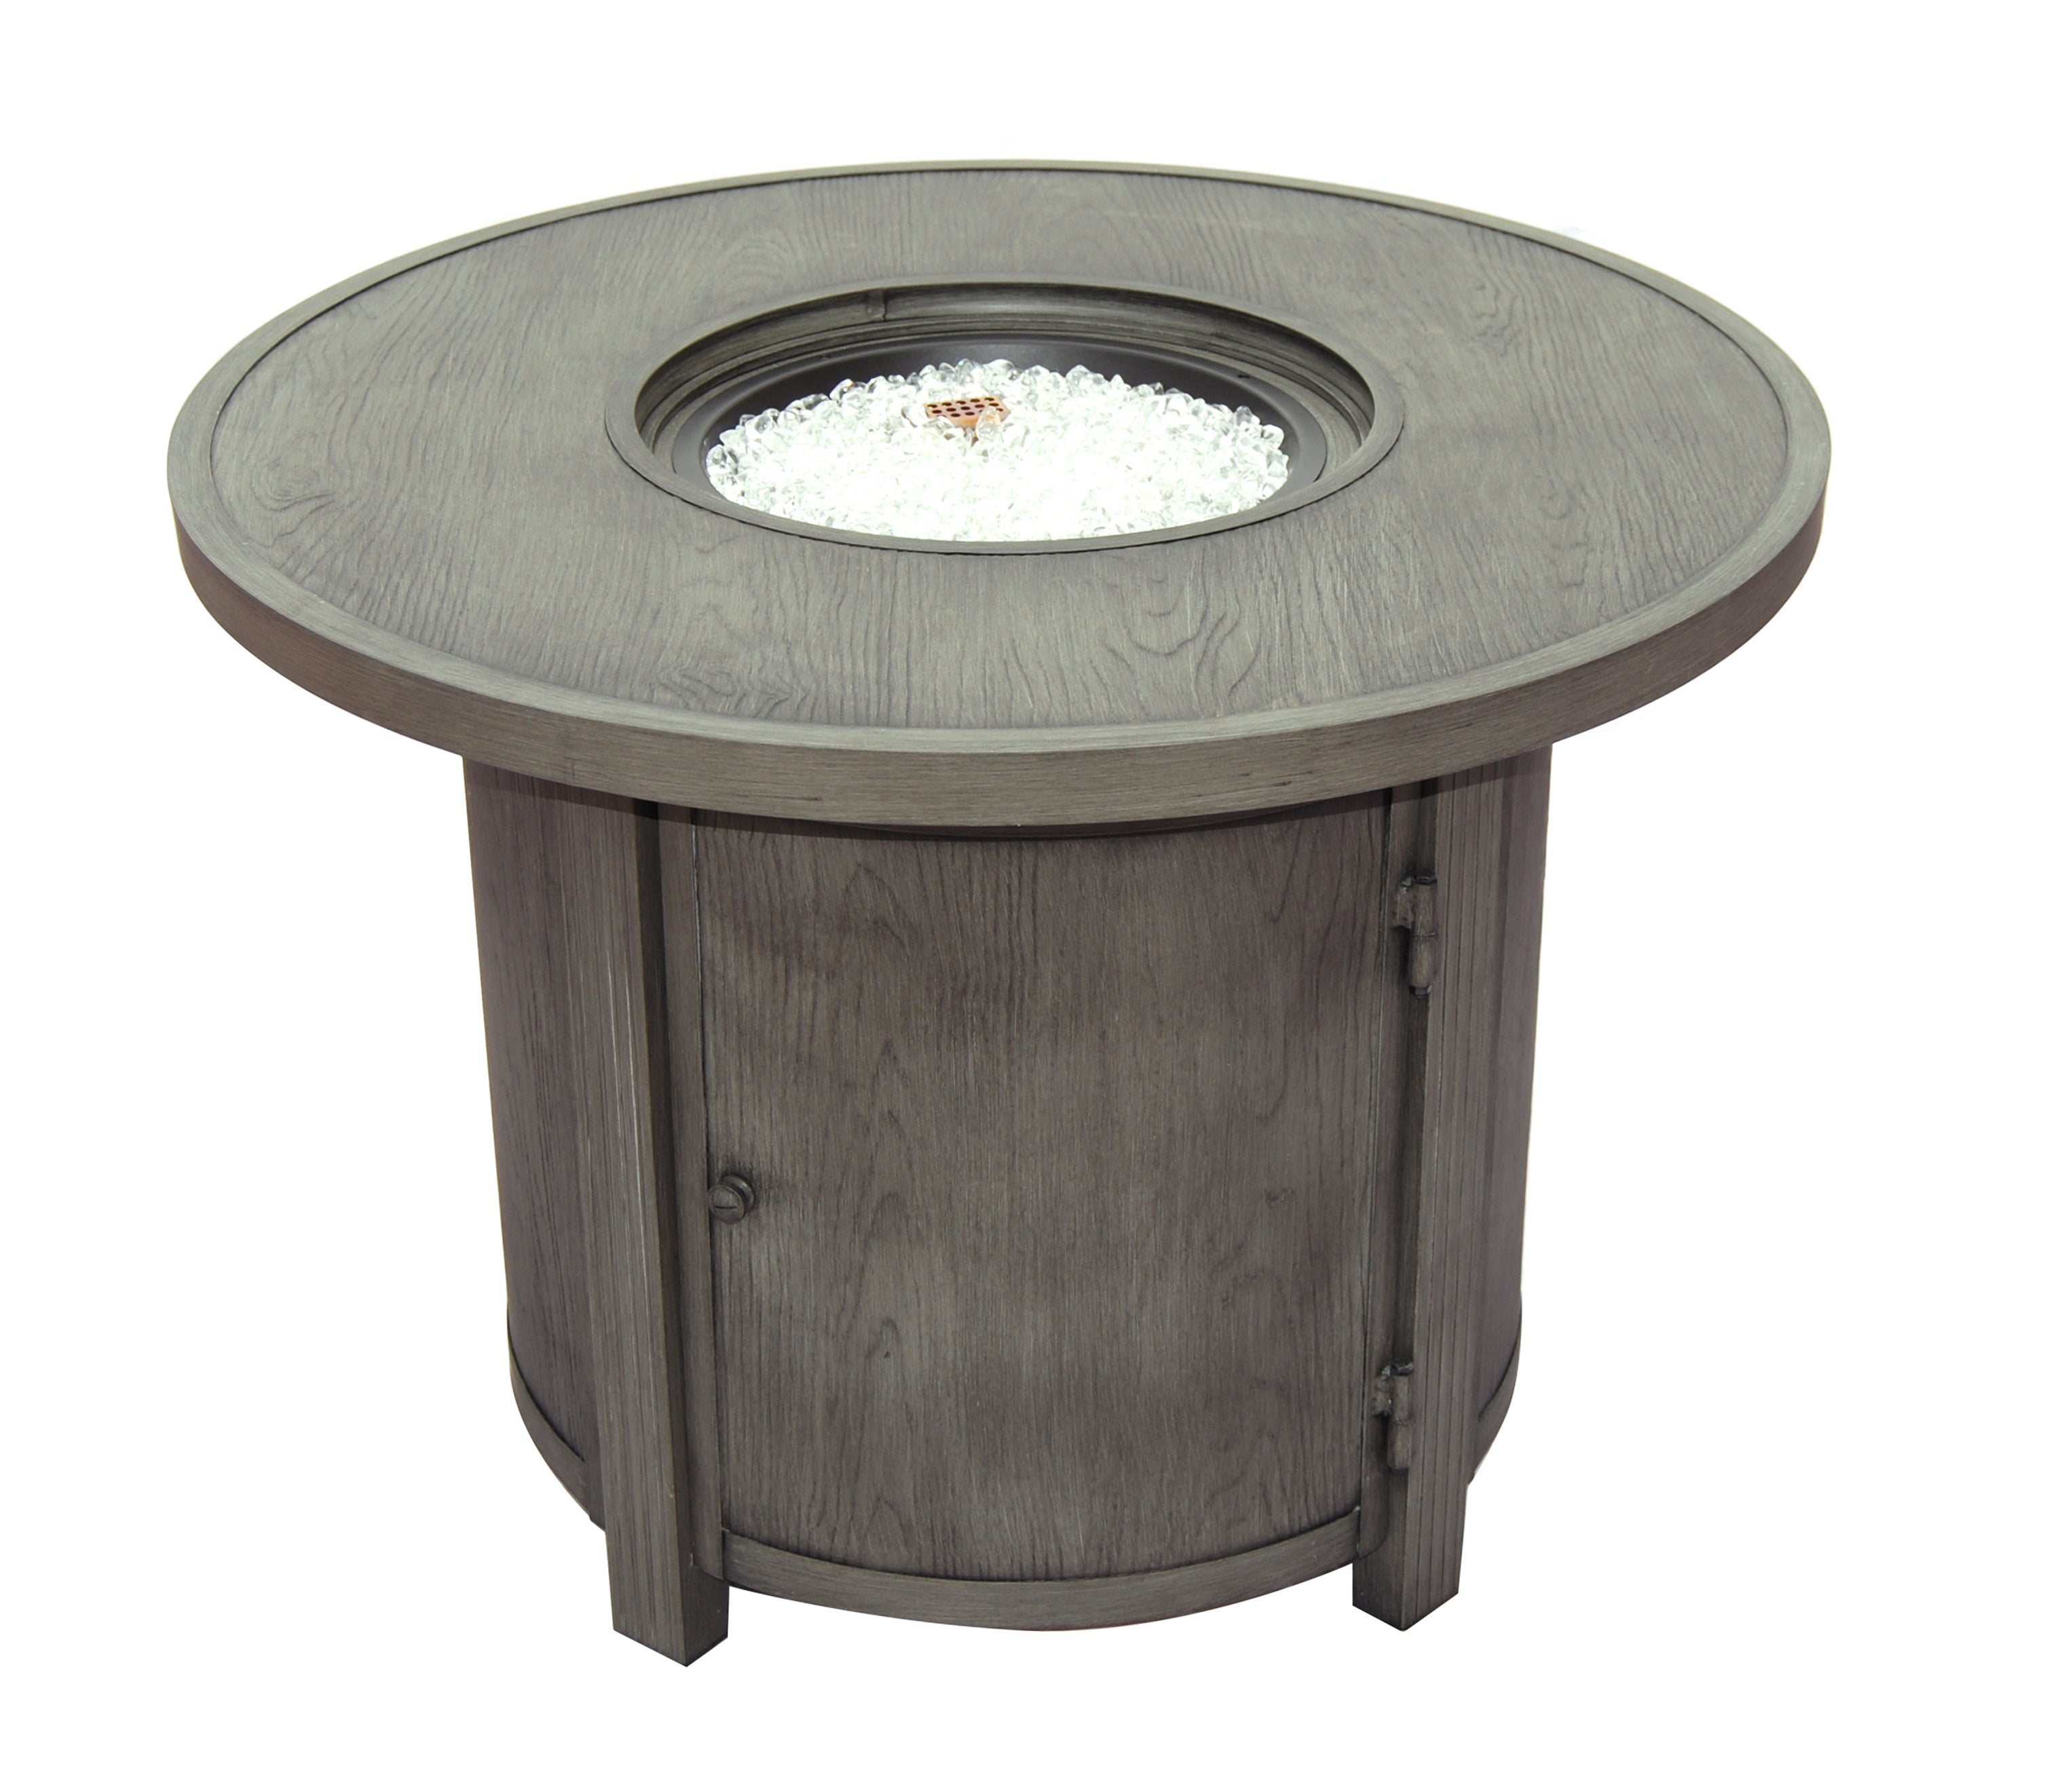 Alfresco Home Spirit Gray Timber Cast Aluminum 36' Round Fire Pit Table